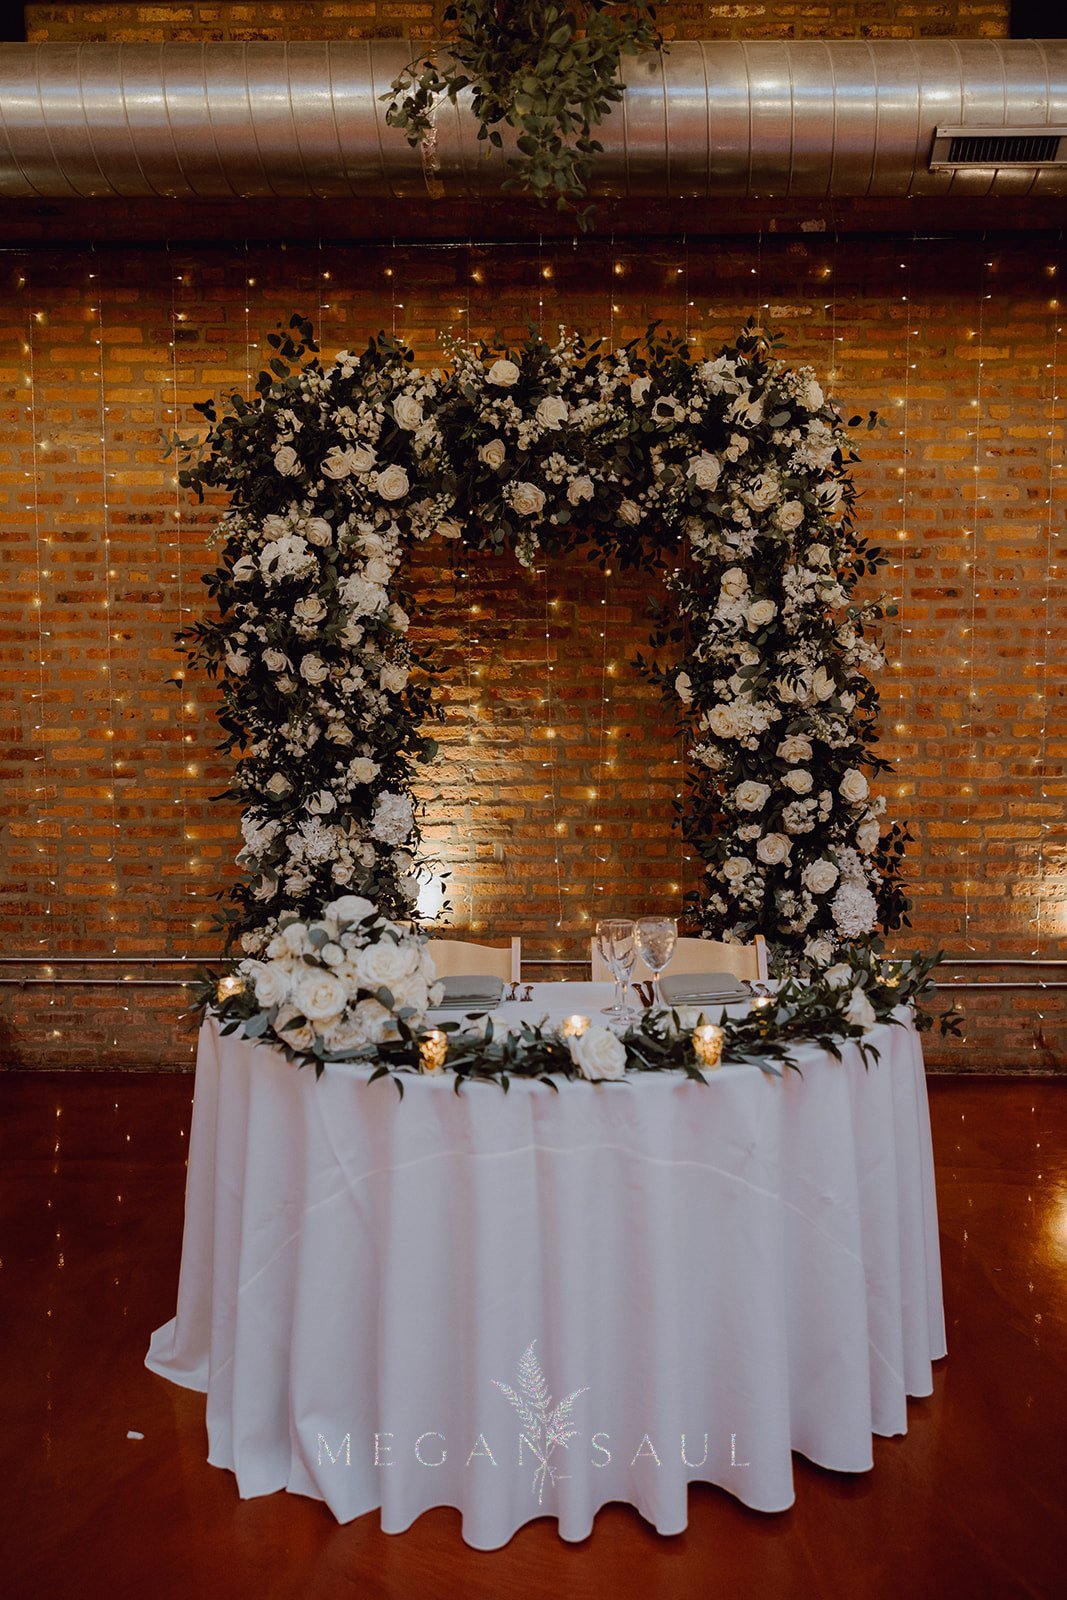 CHICAGO-WEDDING-PHOTOGRAPHY-BY-ARTISTS-AND-STORIES-BY-MEGAN-SAUL-RECEPTION-DECOR (3 of 28)_websize.jpg